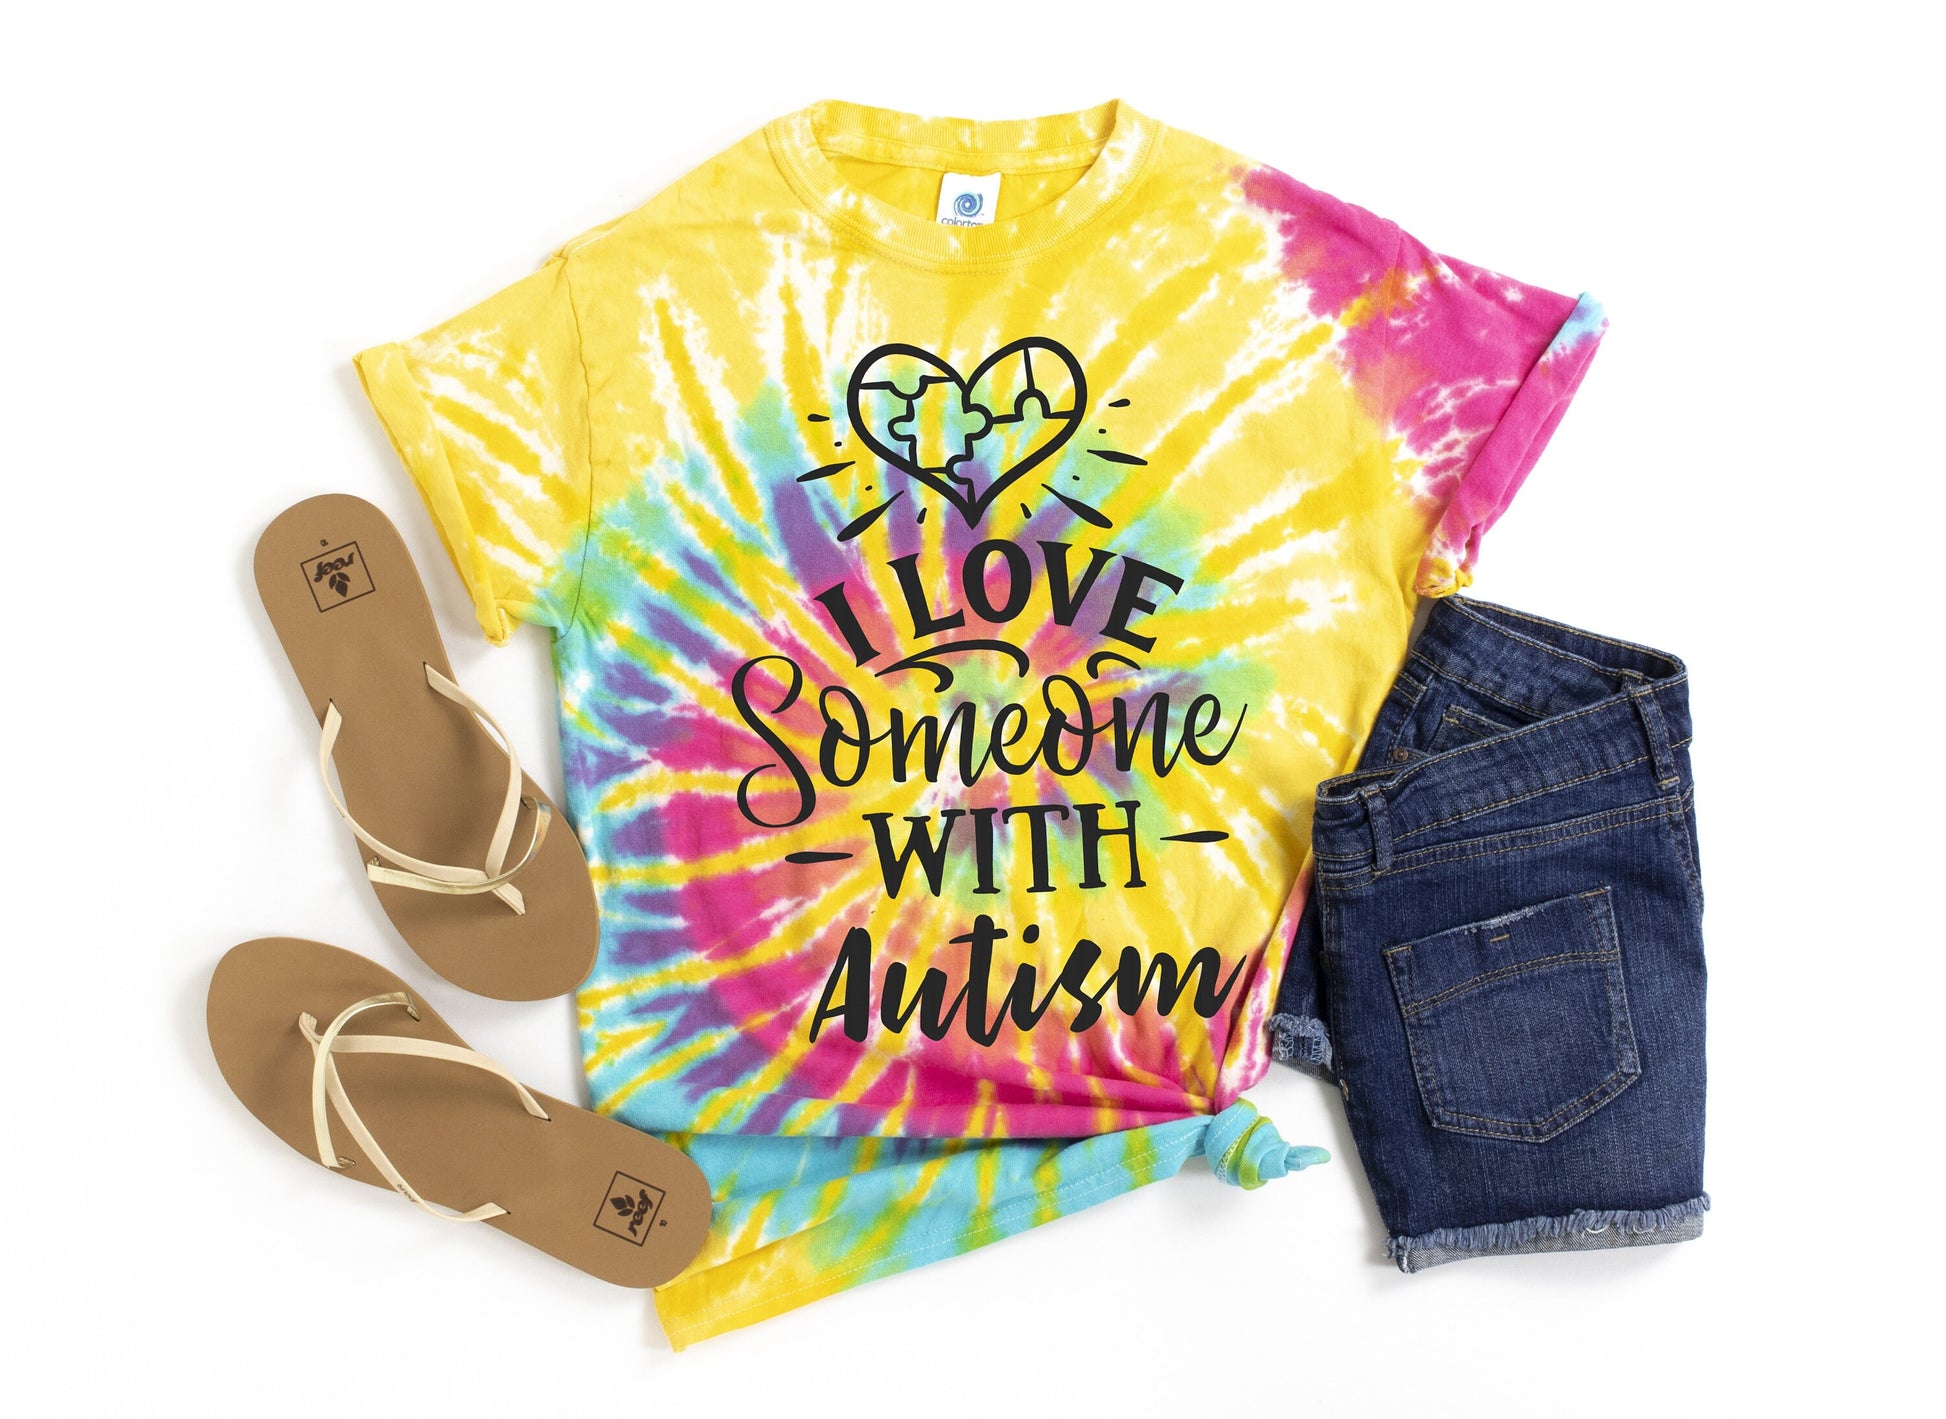 I Love Someone with Autism Tie Dye t-shirt - Kids and Adults Sizes - Autism Mom Shirt - Autism Awareness - Autism Support -Autism Kids Shirt